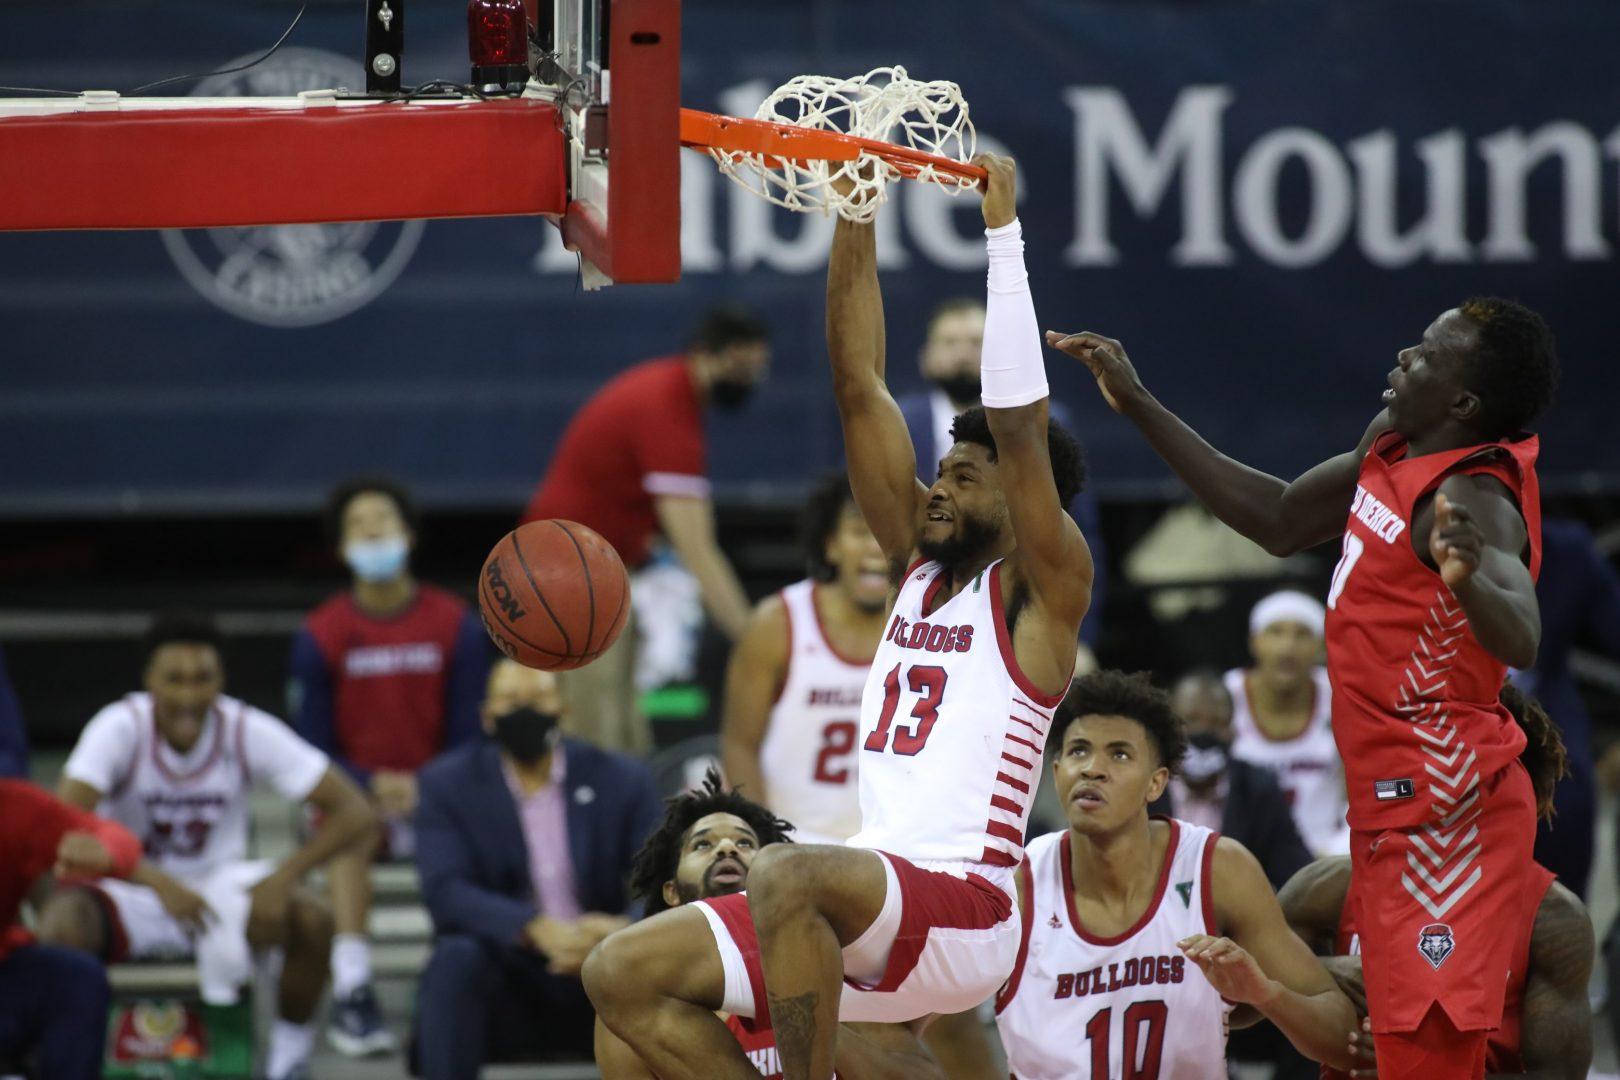 Deon Stroud hangs on the rim after a two-handed dunk. (Sam Marshall/Fresno State Athletics)